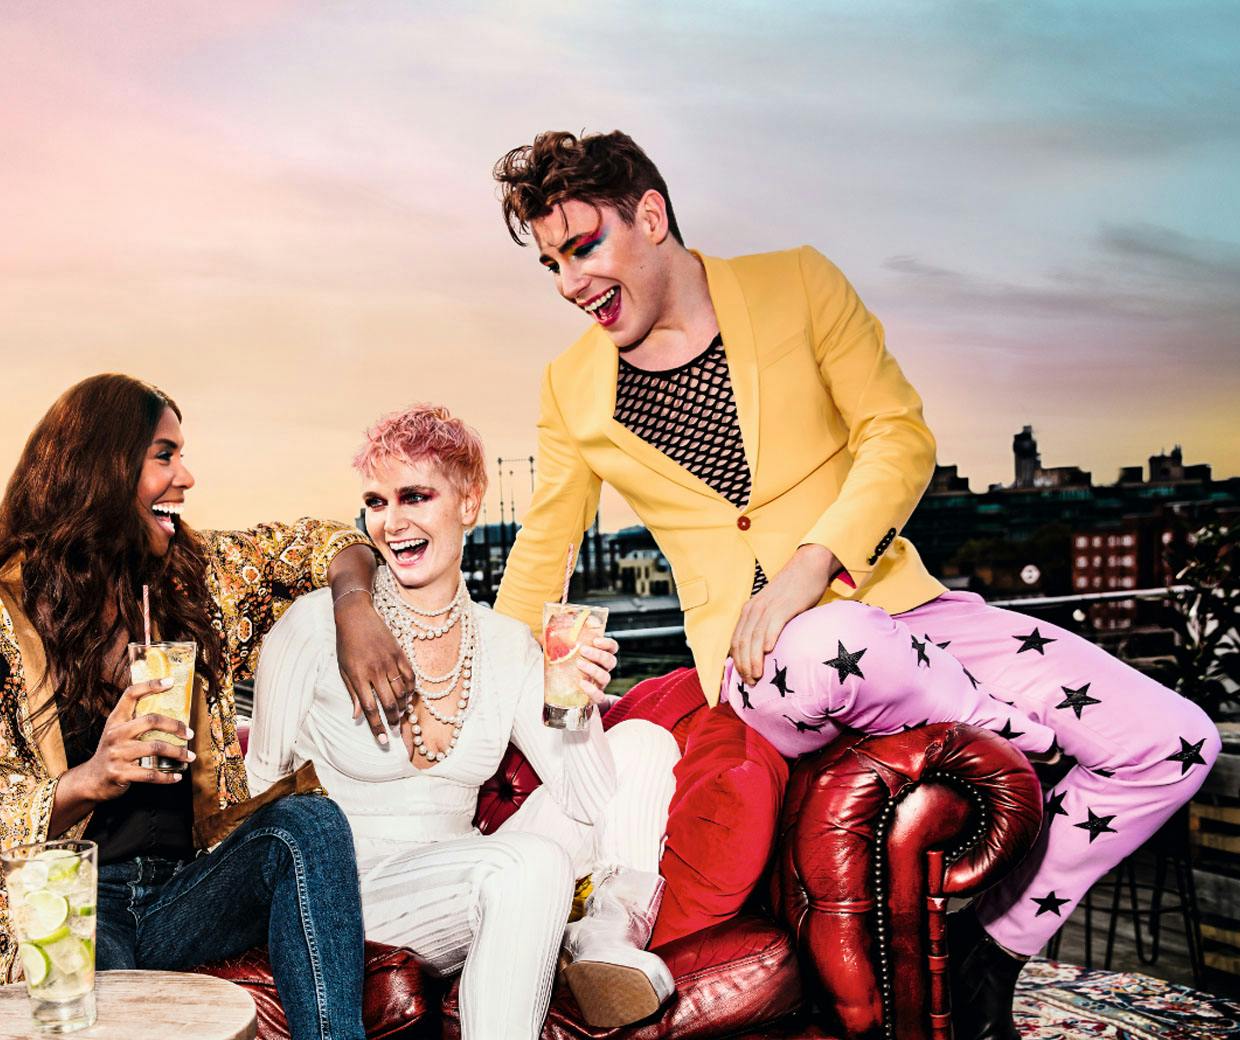 Smirnoff Aims For Societal Change With New Lgbt Campaign